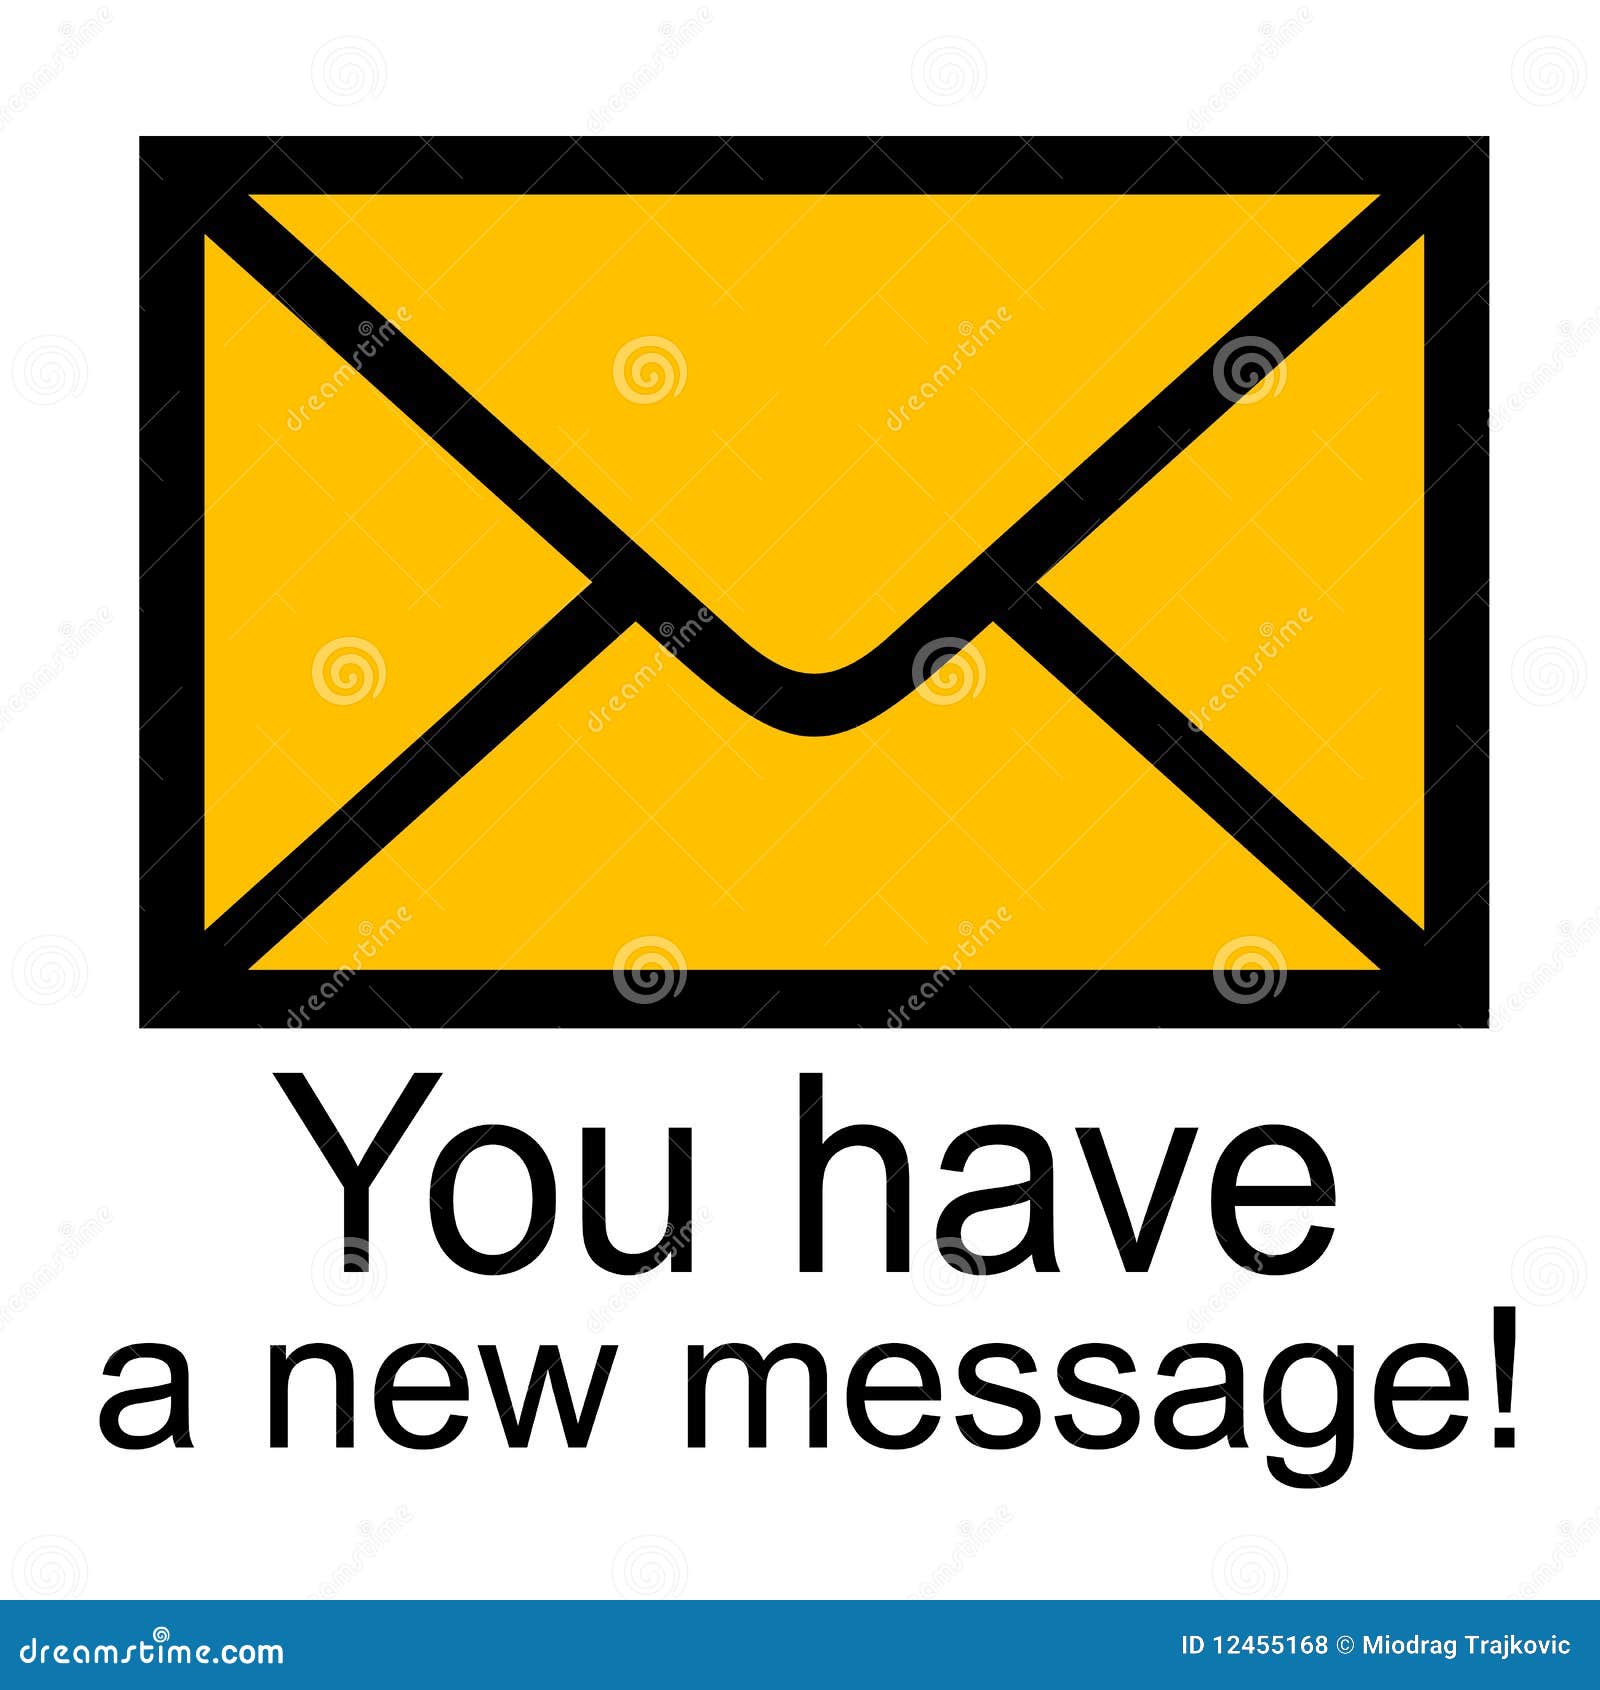 You have new mail. New message. Новое сообщение. You have New message картинка. 1 New message.